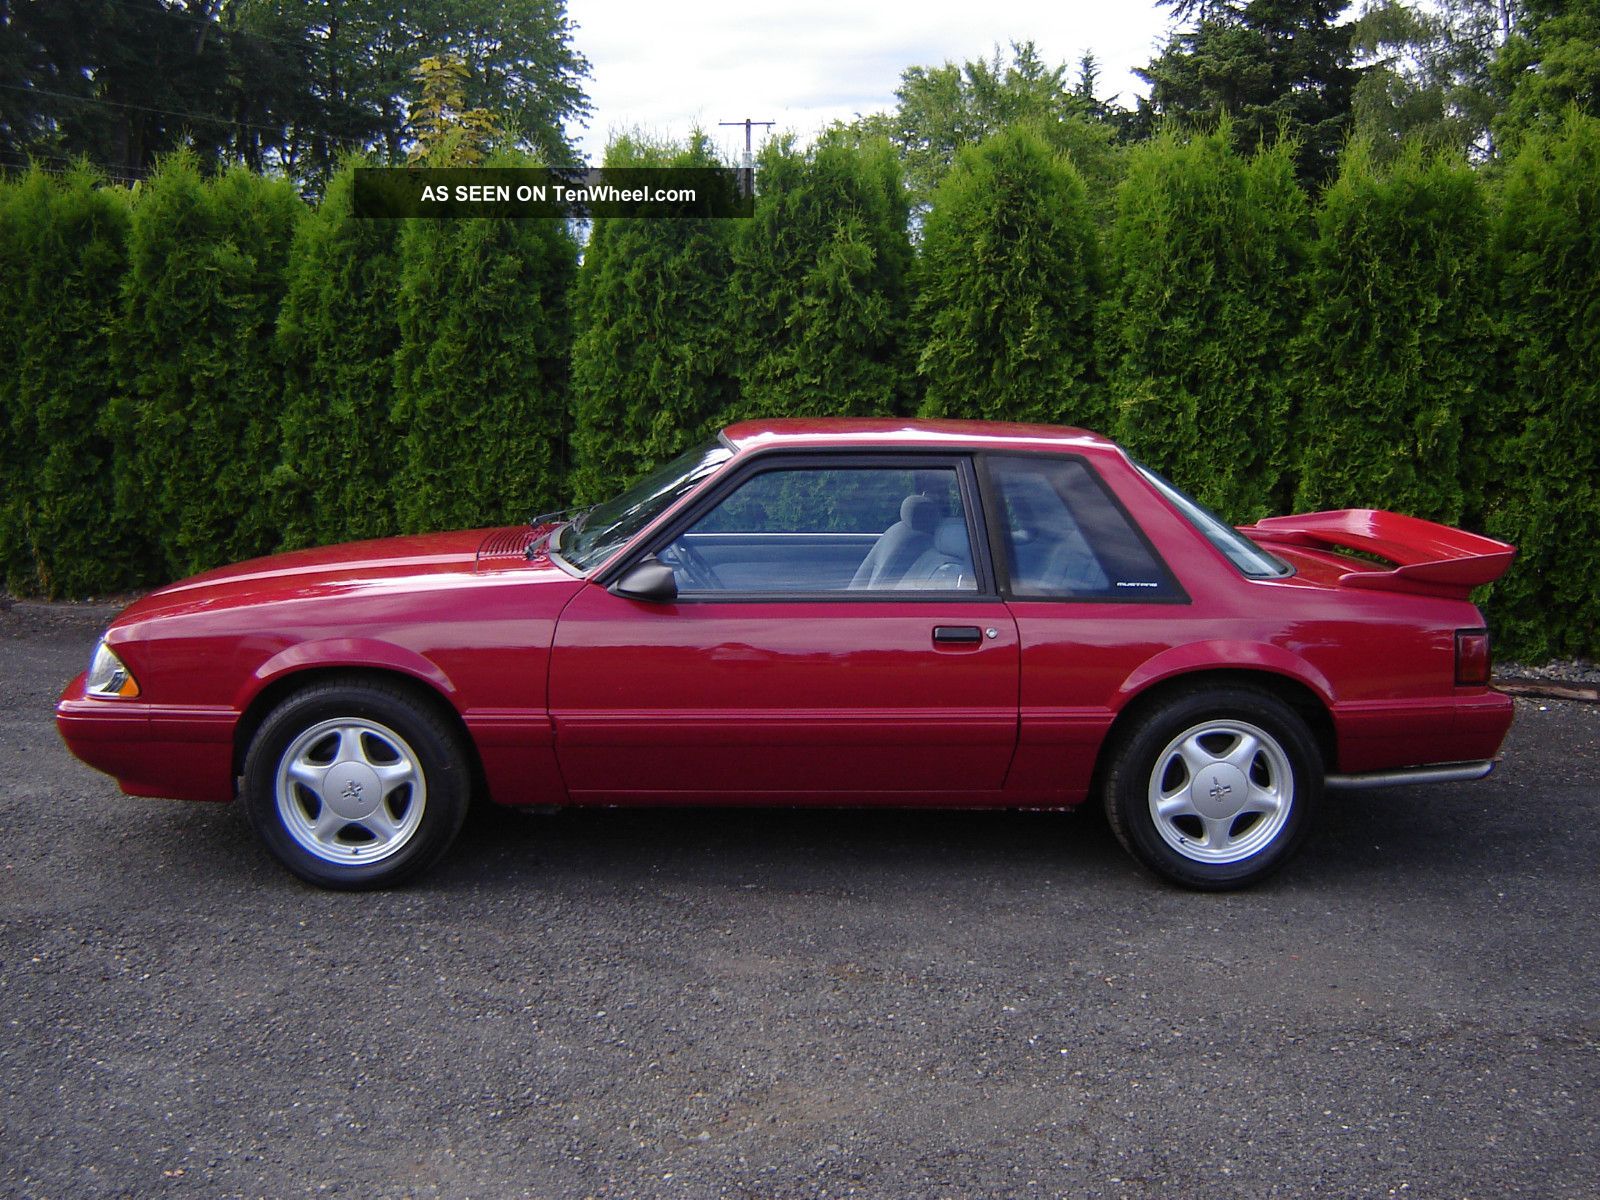 1989 Ford Mustang Lx 5.0 Specs